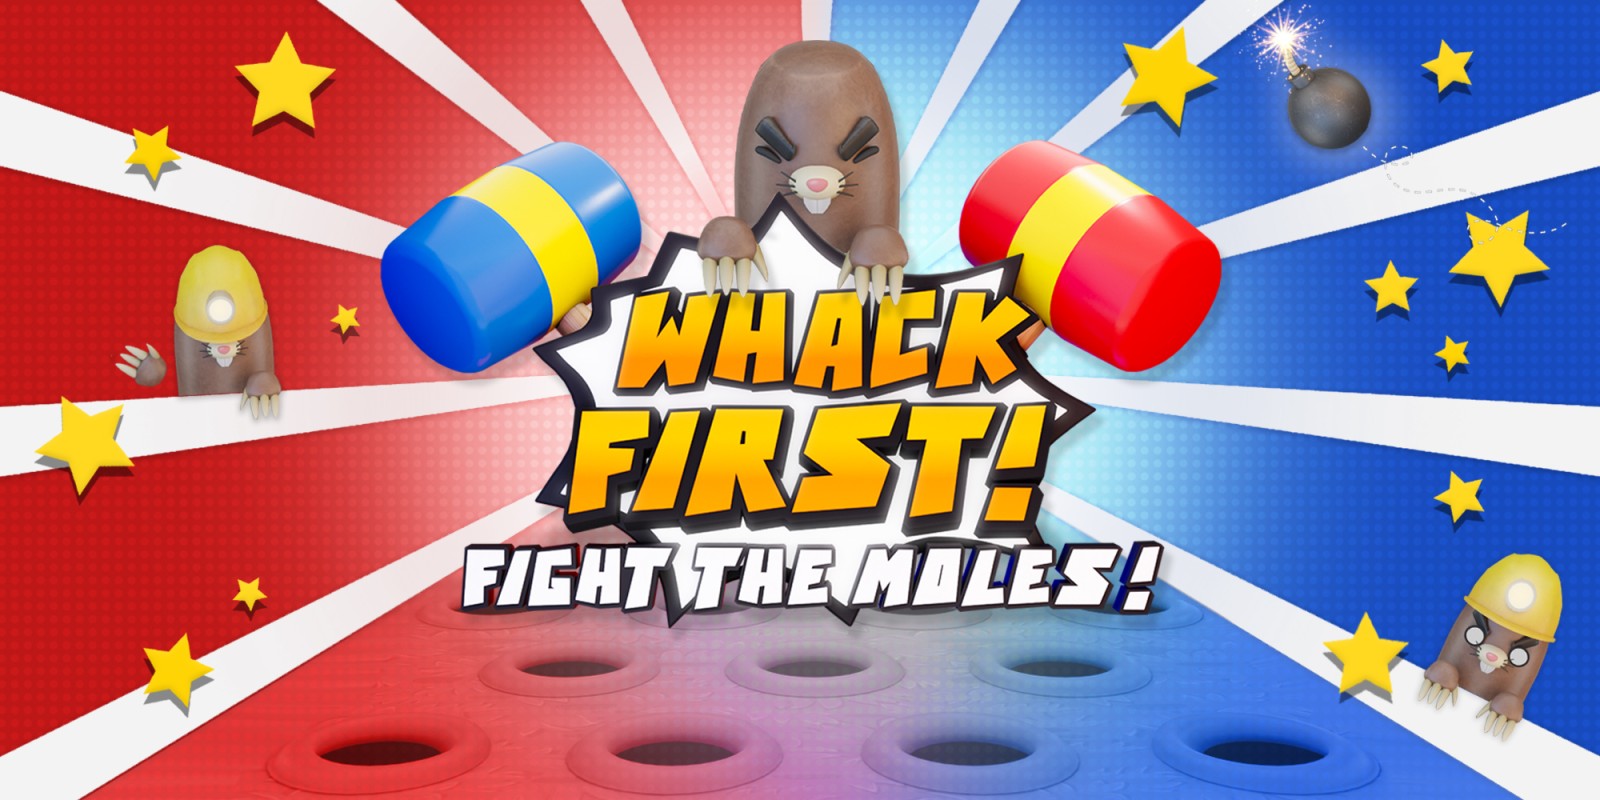 Whack first! - Fight the moles